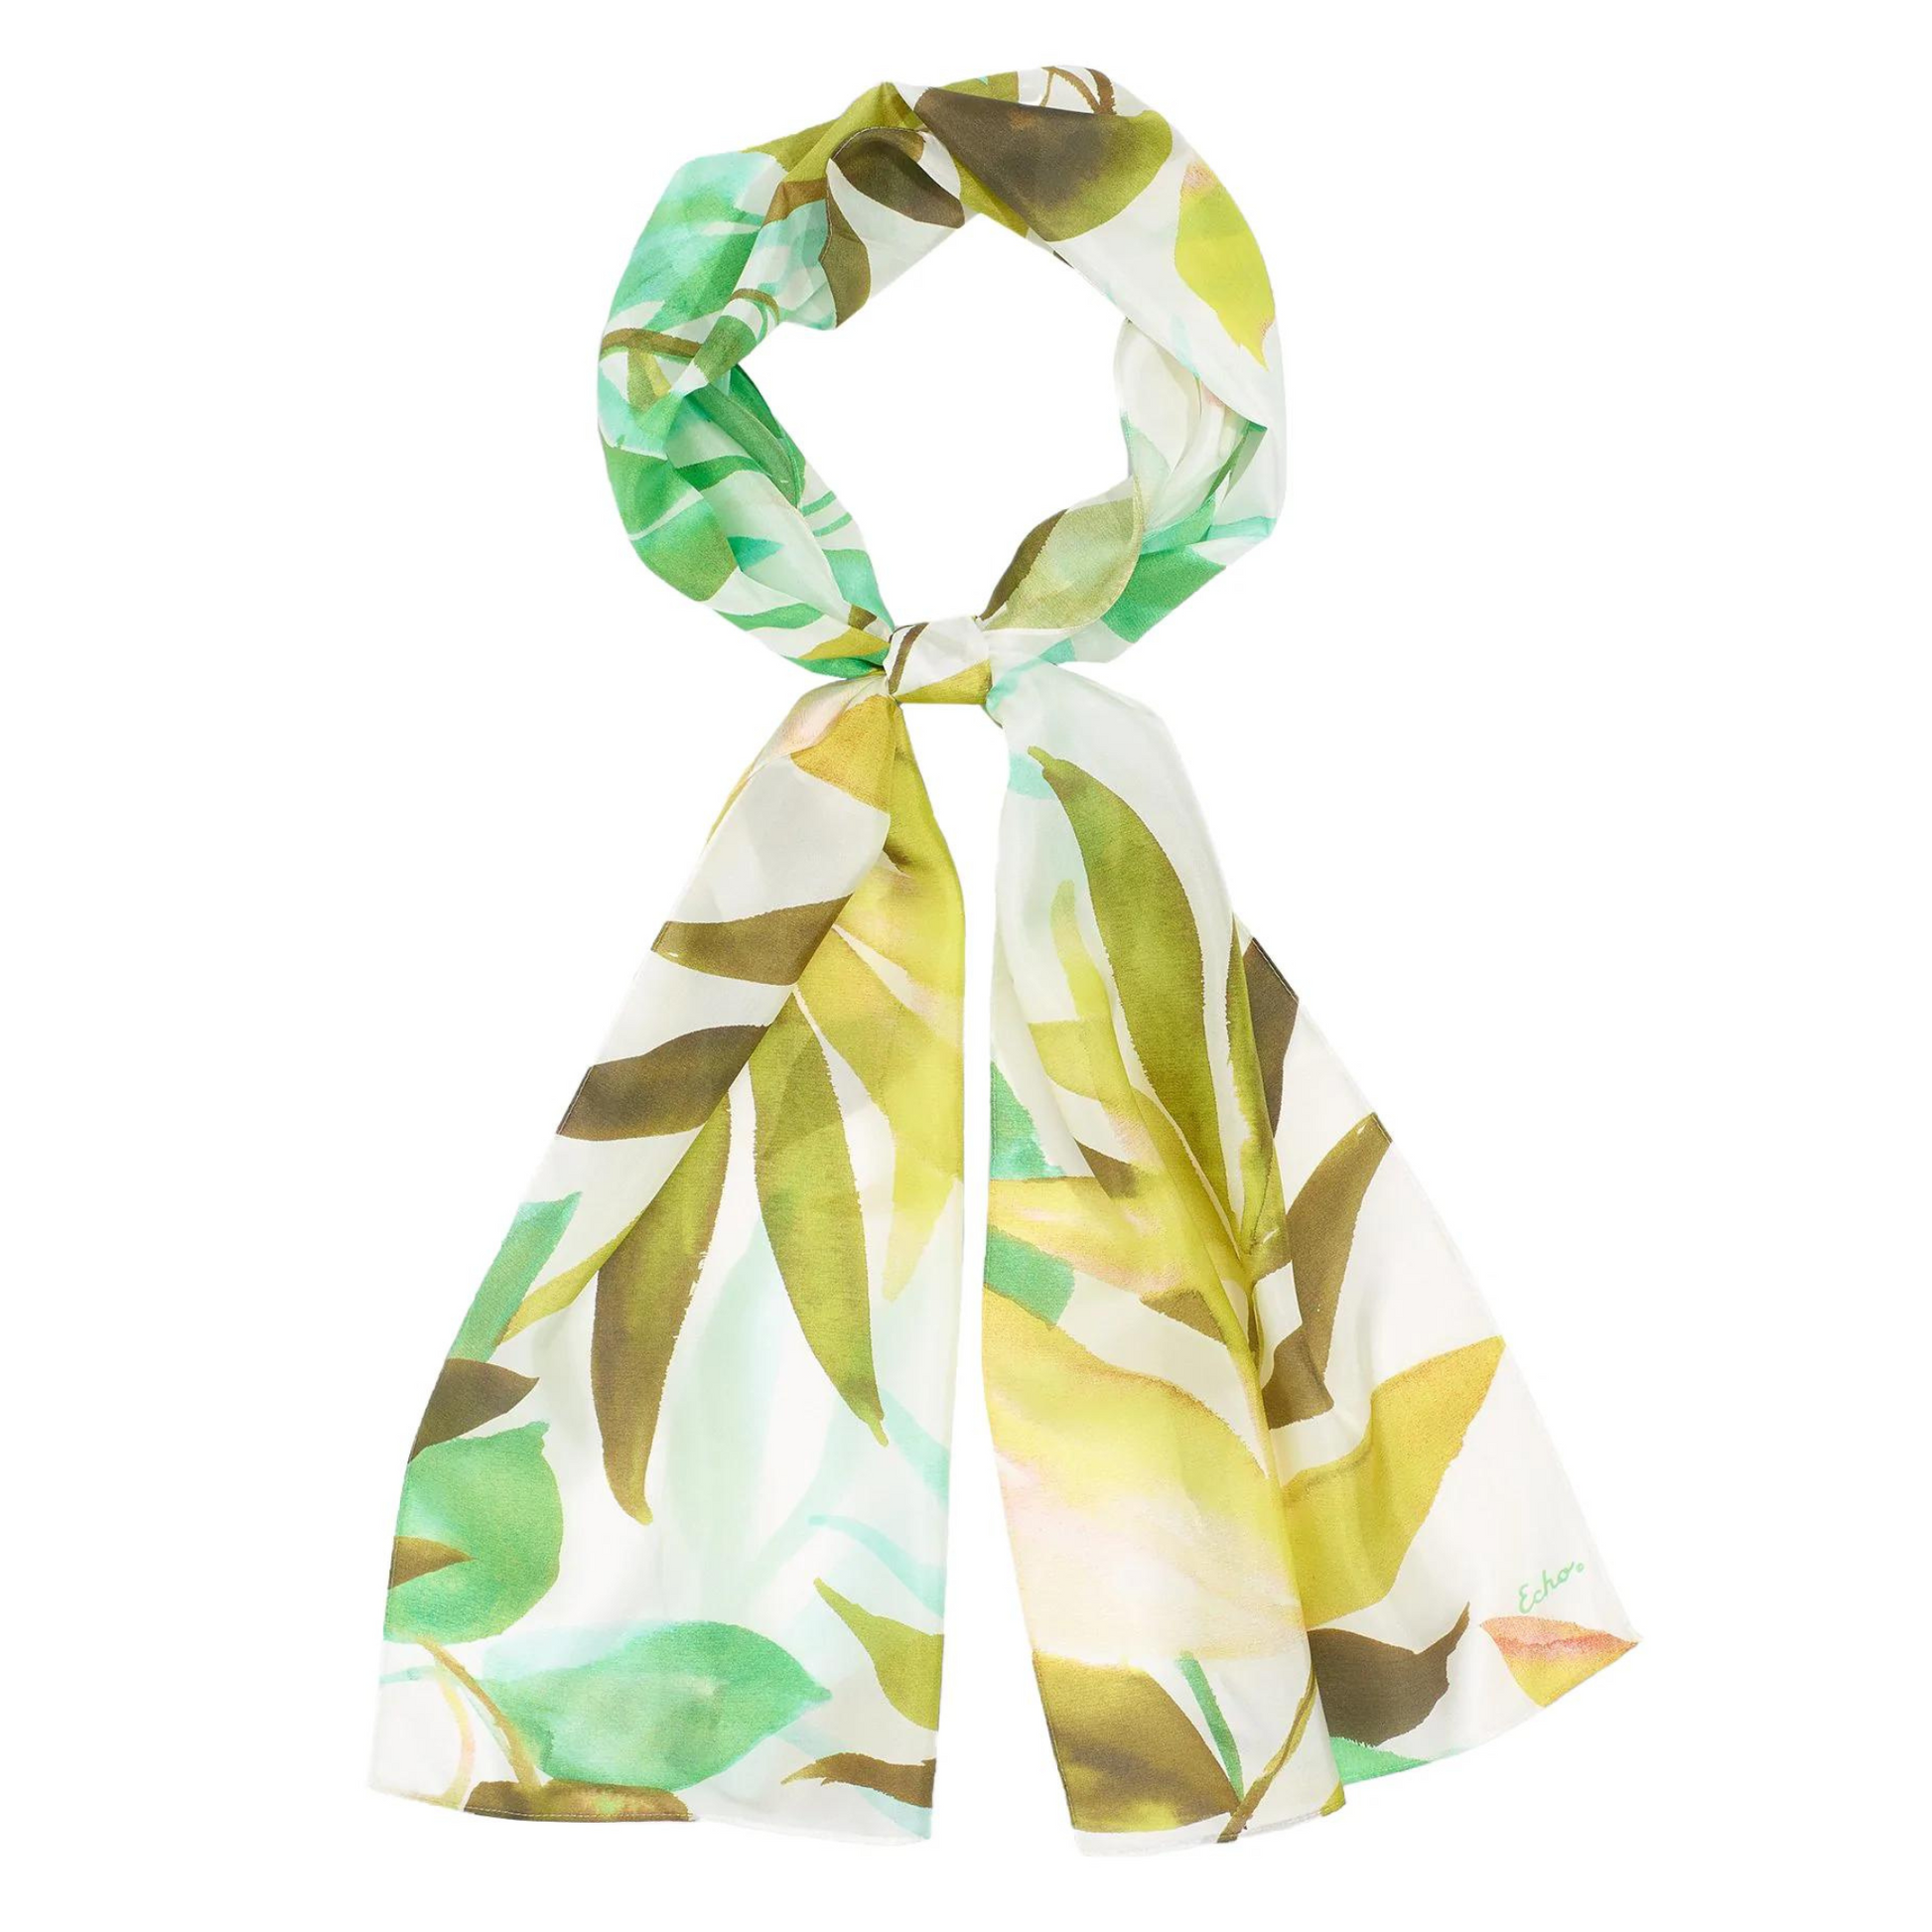 A scarf with watercolour palm leaves in various shades of green on a white background is shown looped around itself.